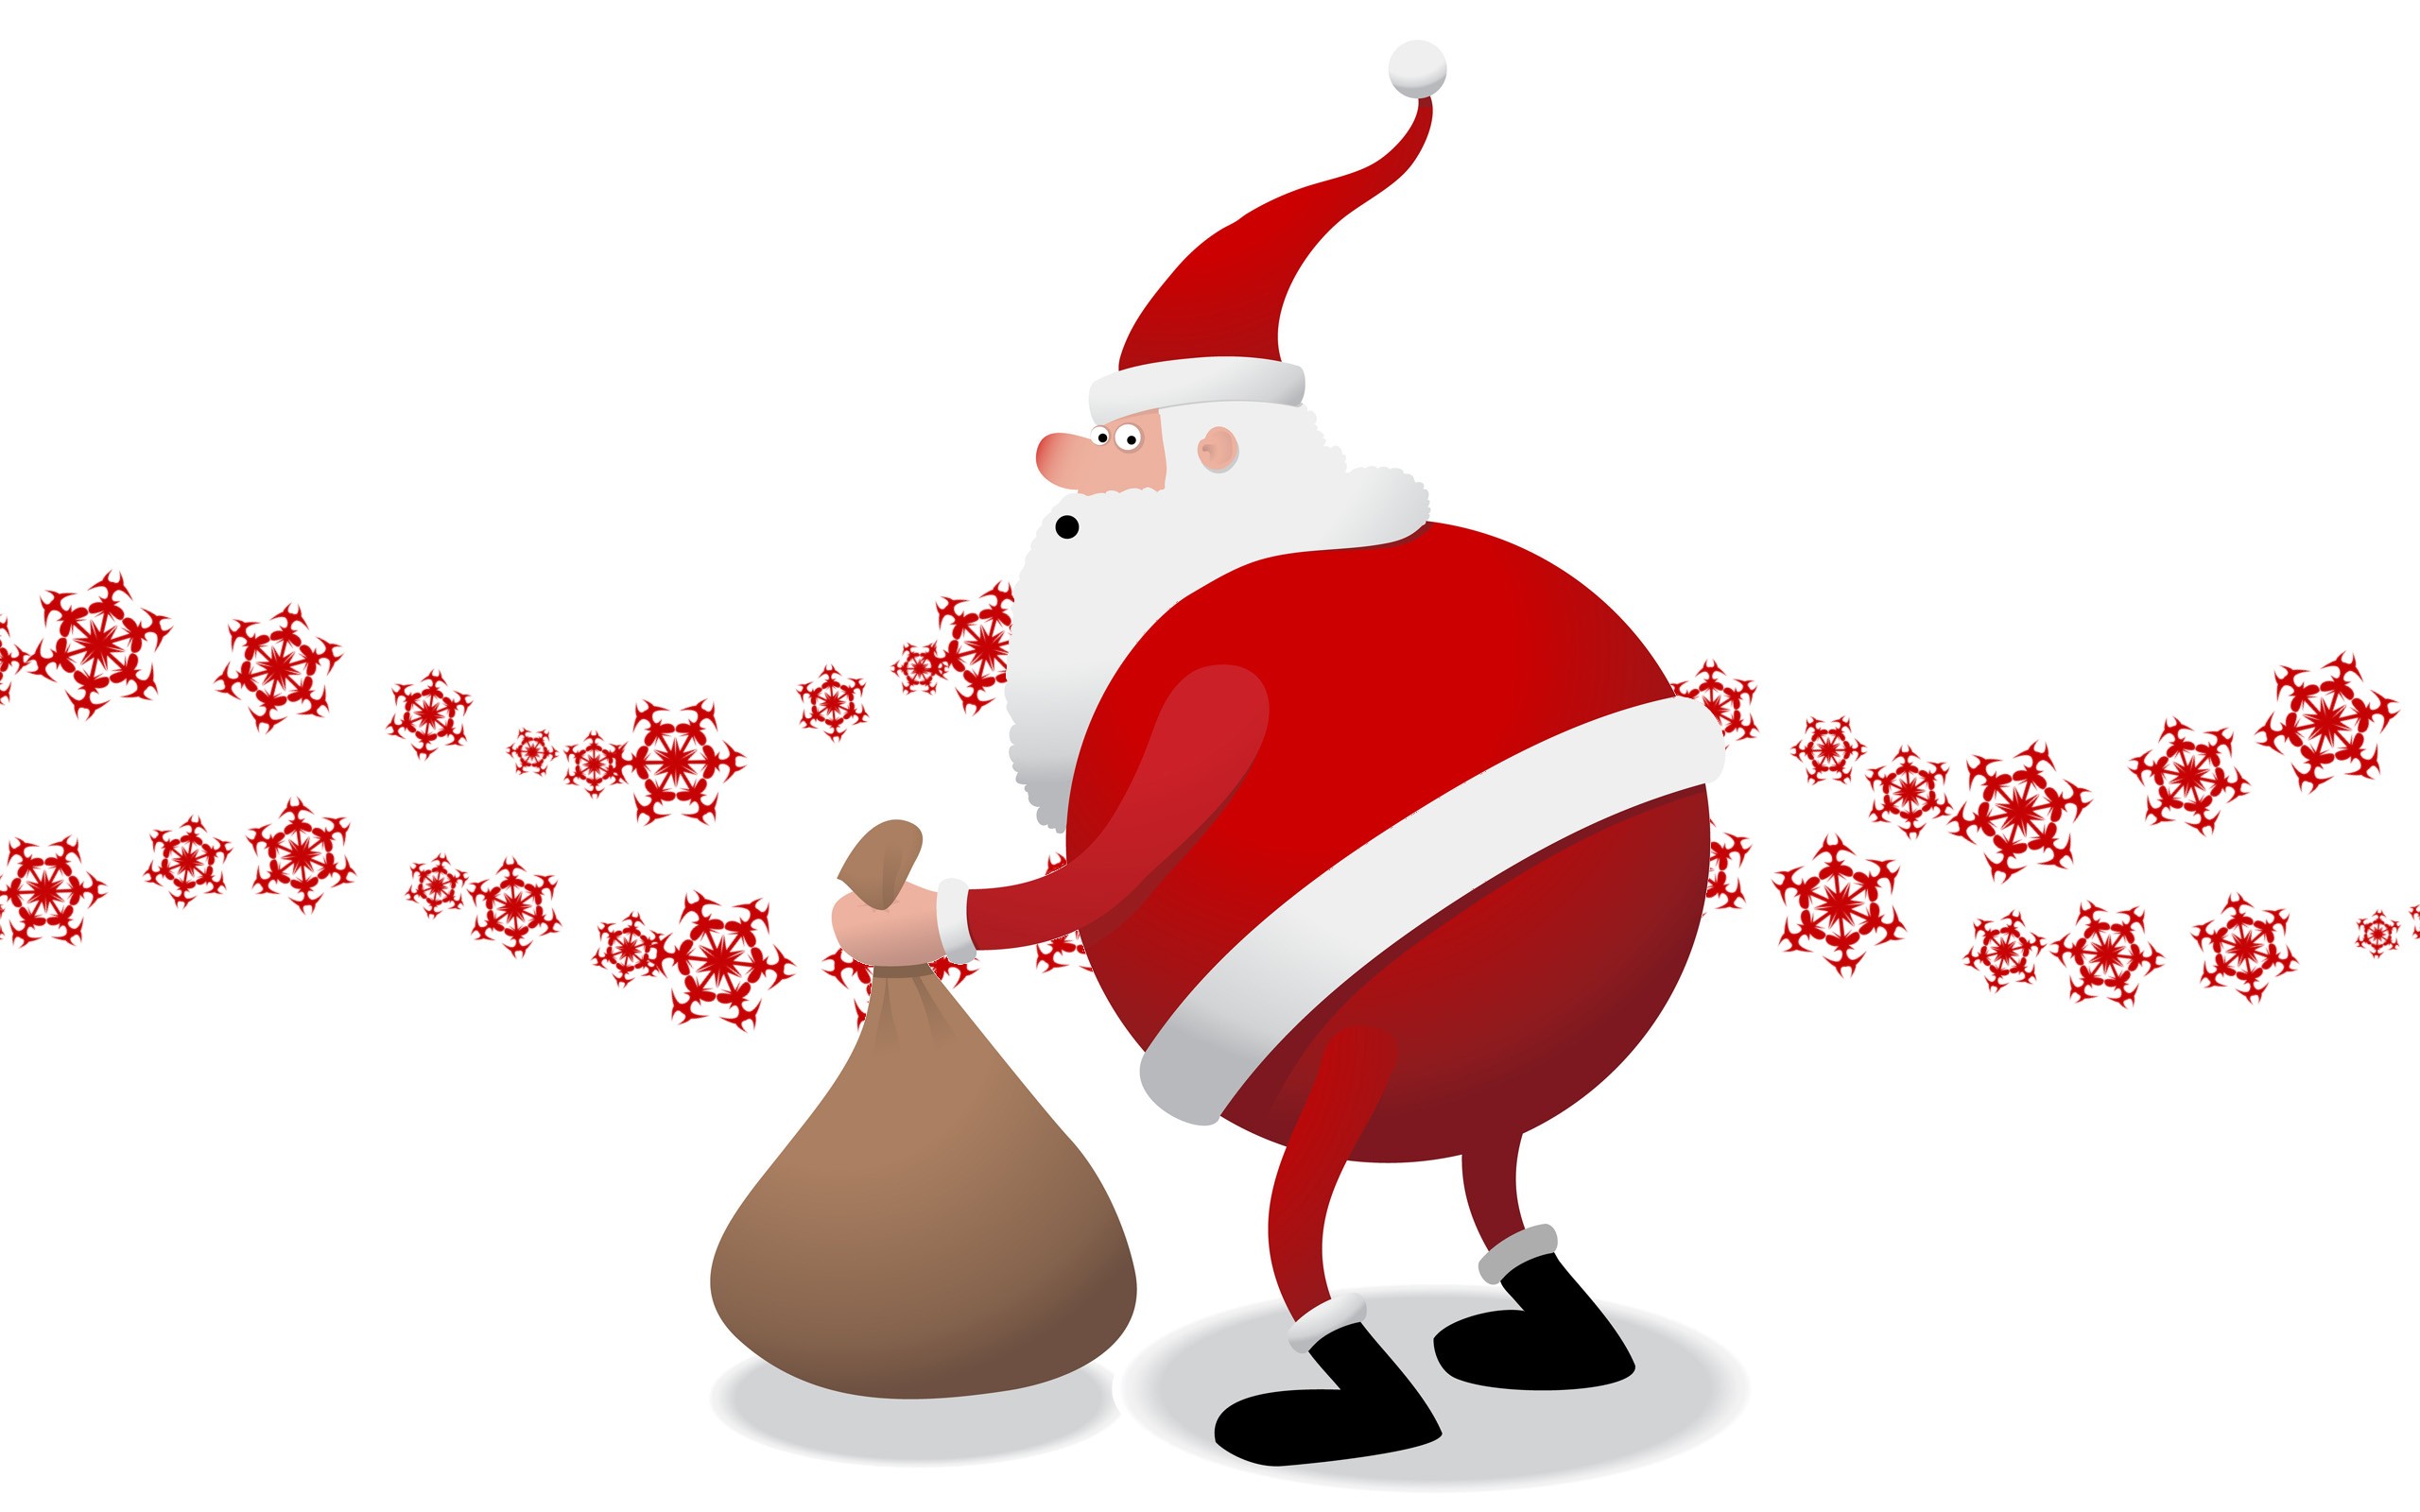 General 2560x1600 New Year snow Christmas holiday Santa Claus simple background white background